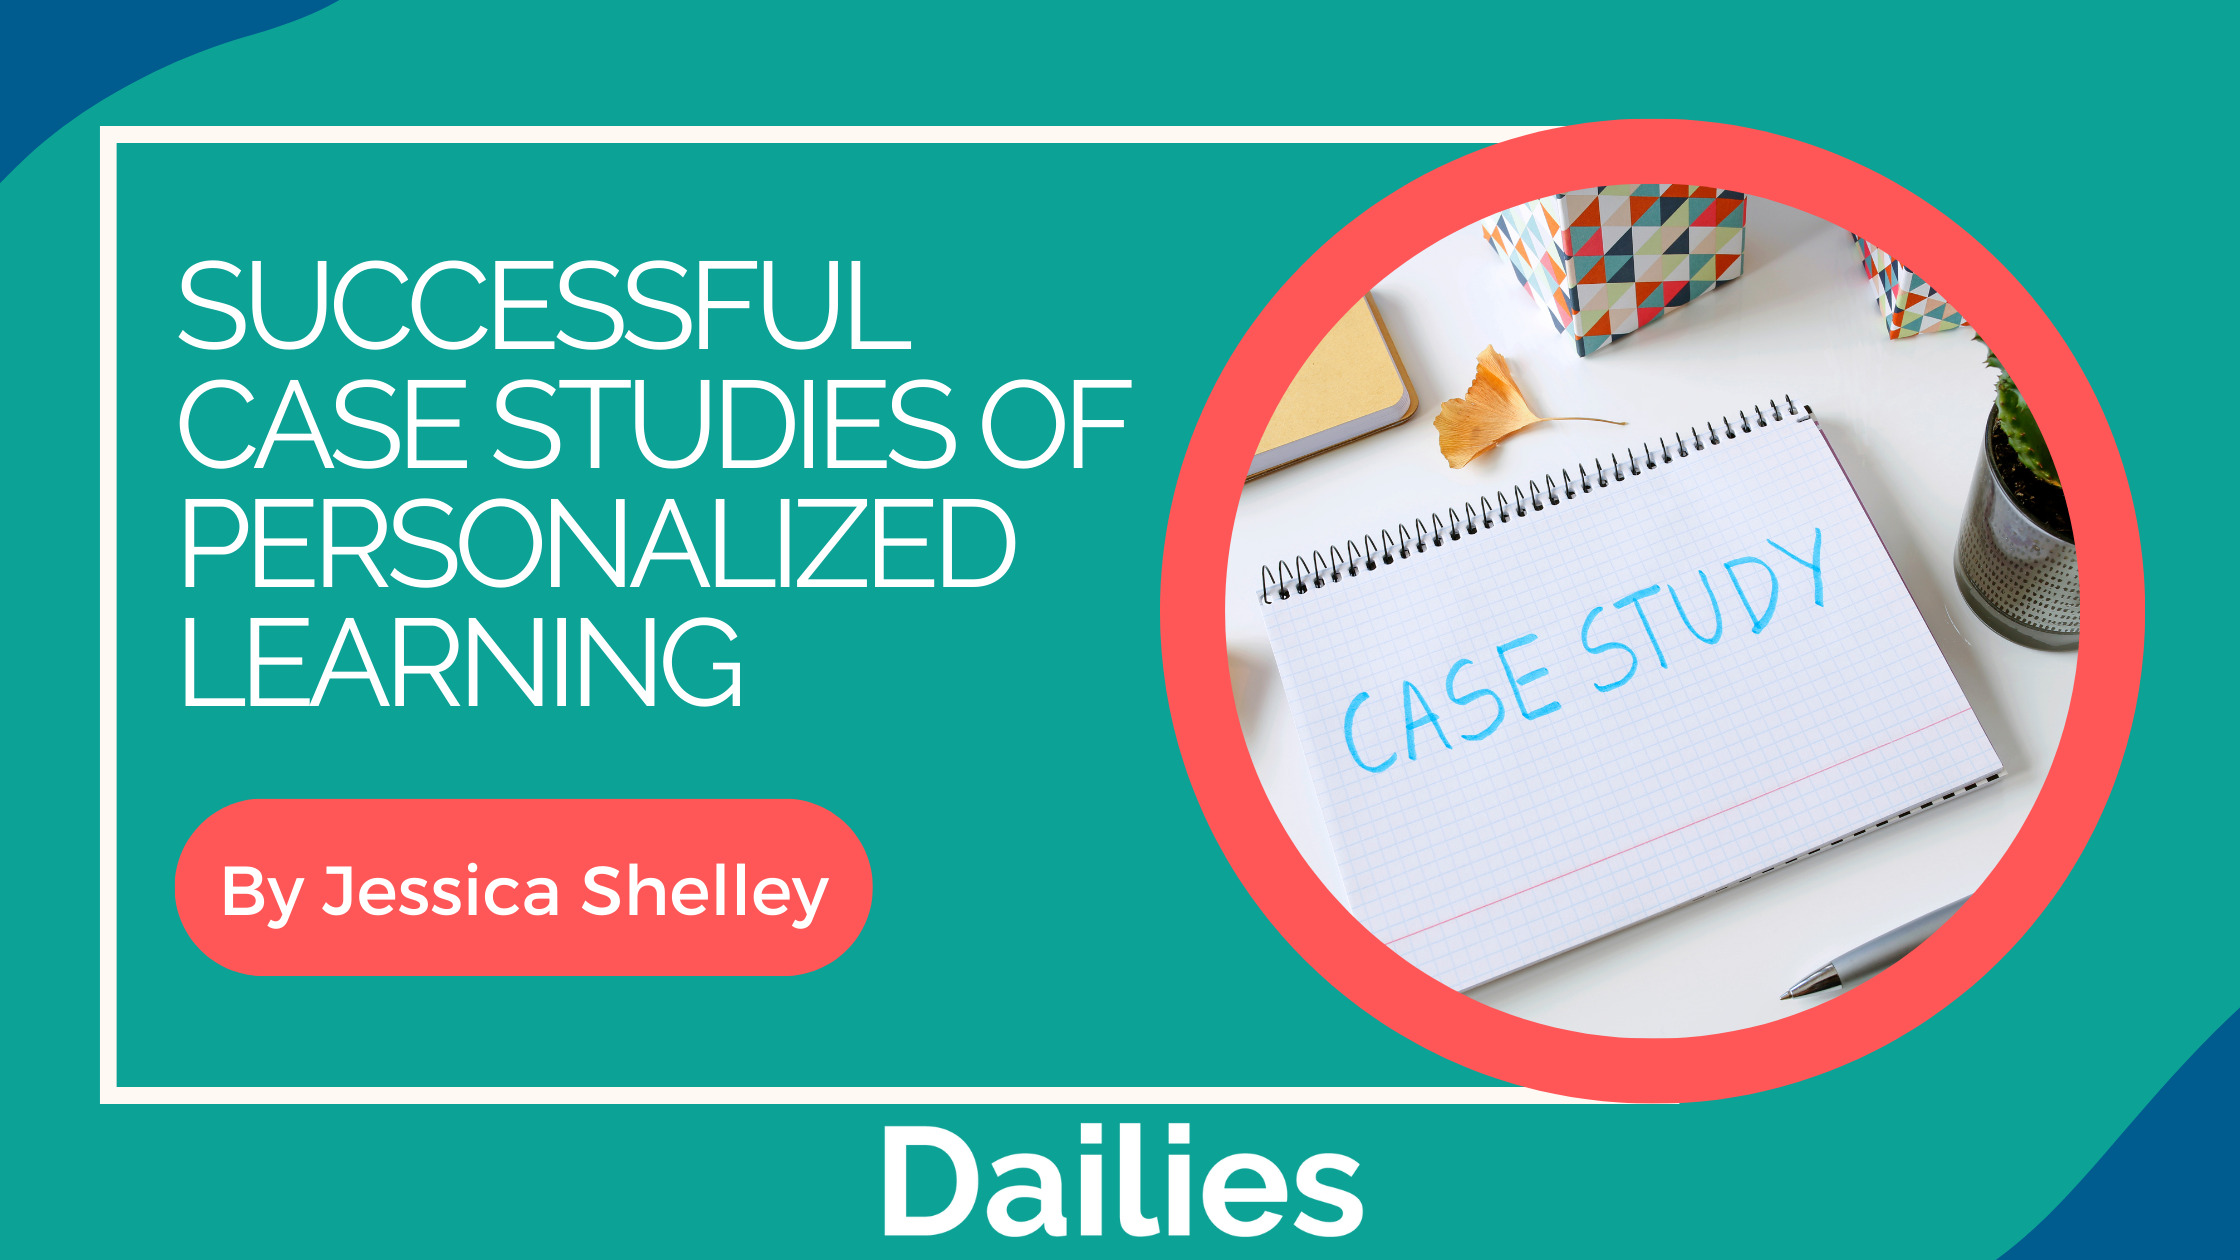 Case Studies of Personalized Learning